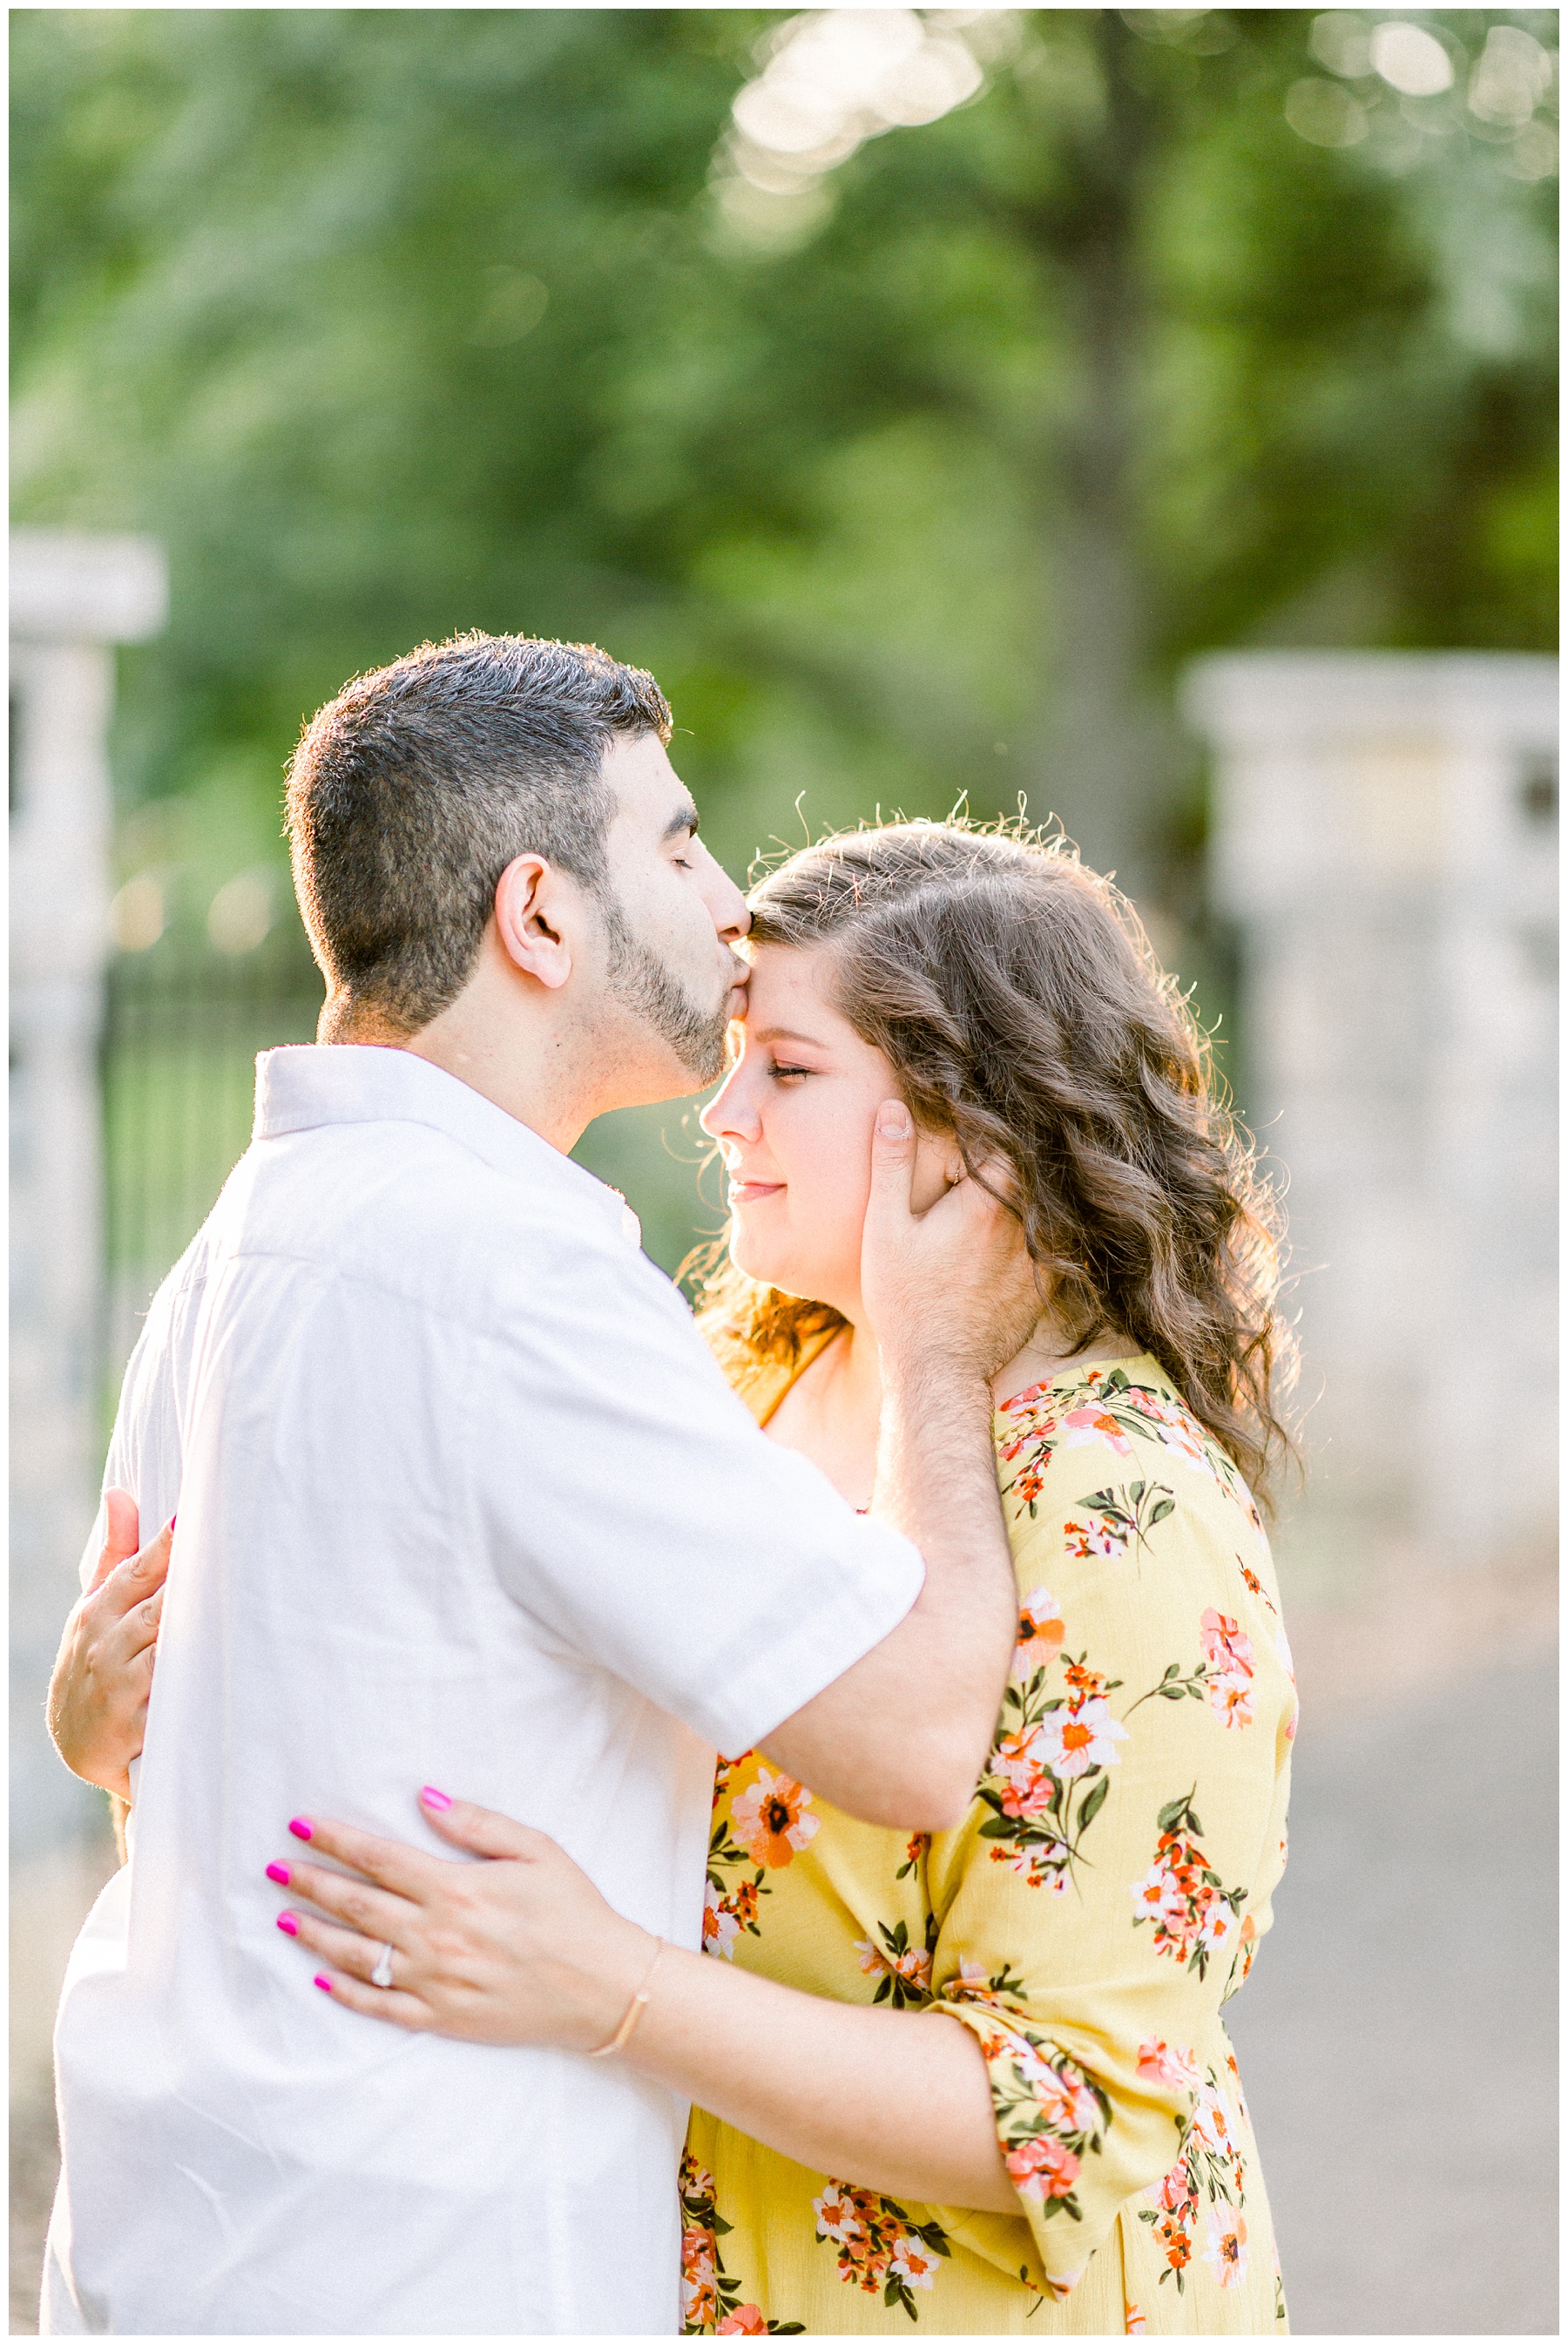 Whetstone Park of Roses Engagement session in Columbus OH Raleigh Wedding Photographer